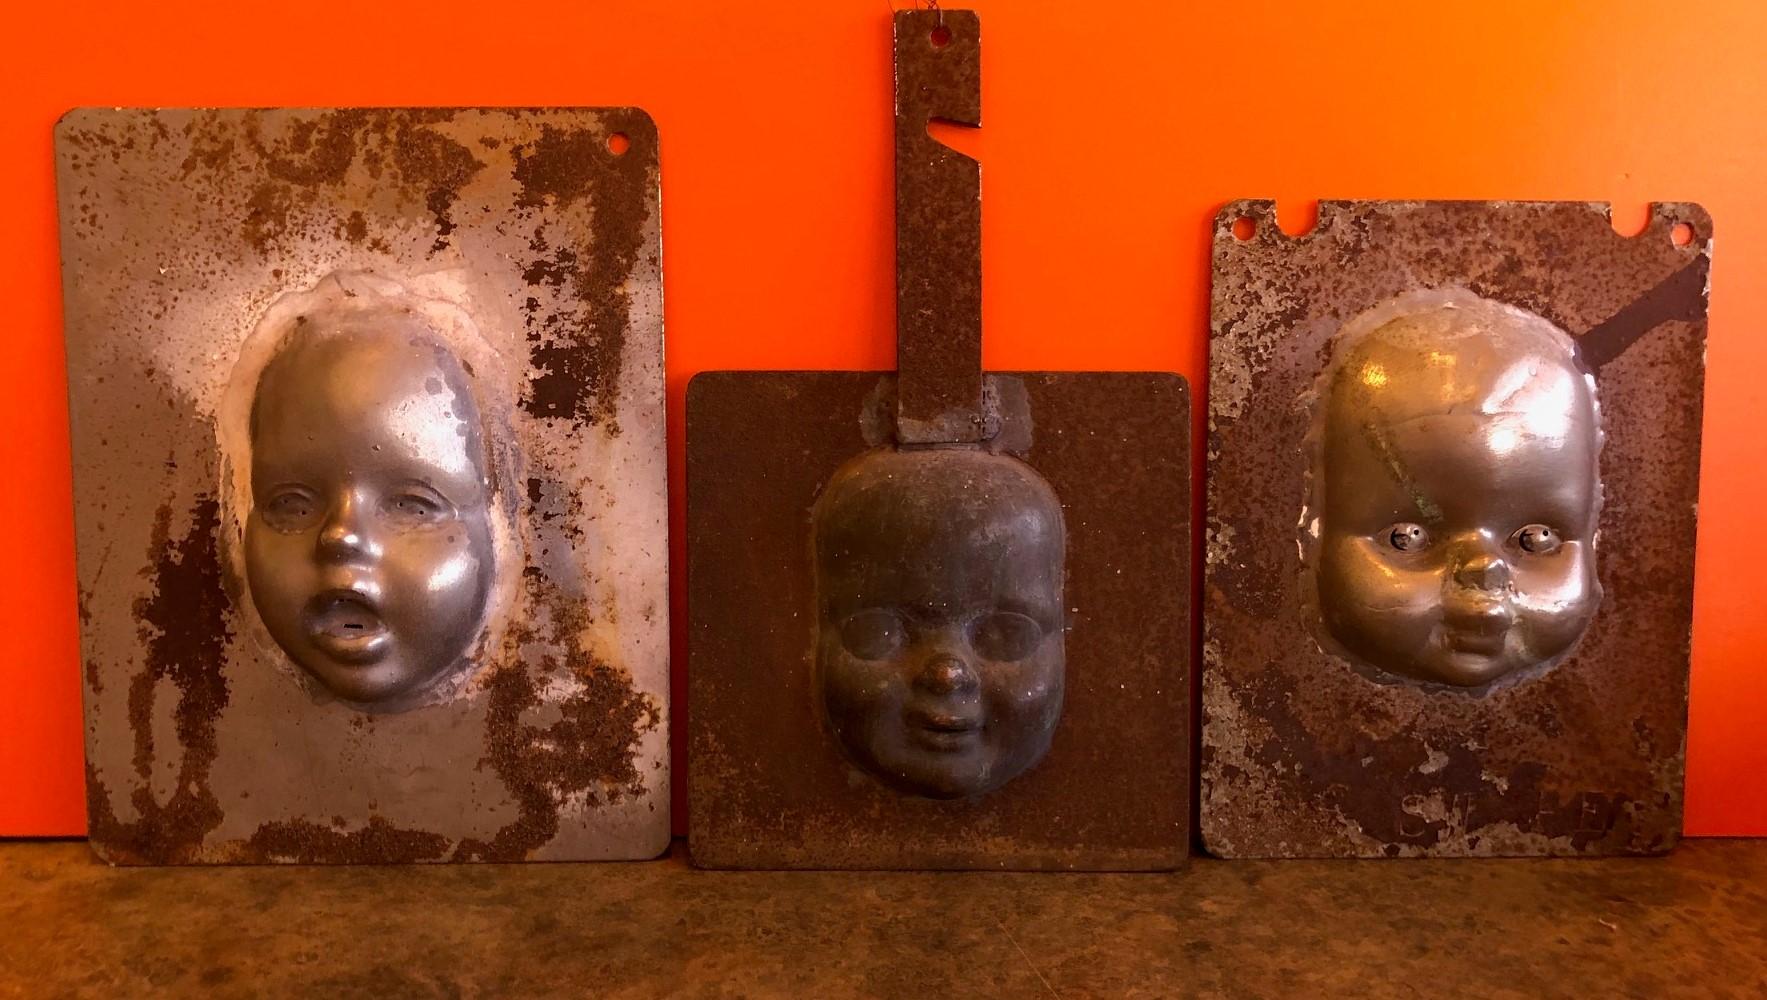 Rare set of three vintage metal doll head / face molds, circa 1930s. The Industrial looking pieces are quite unique and make a great 